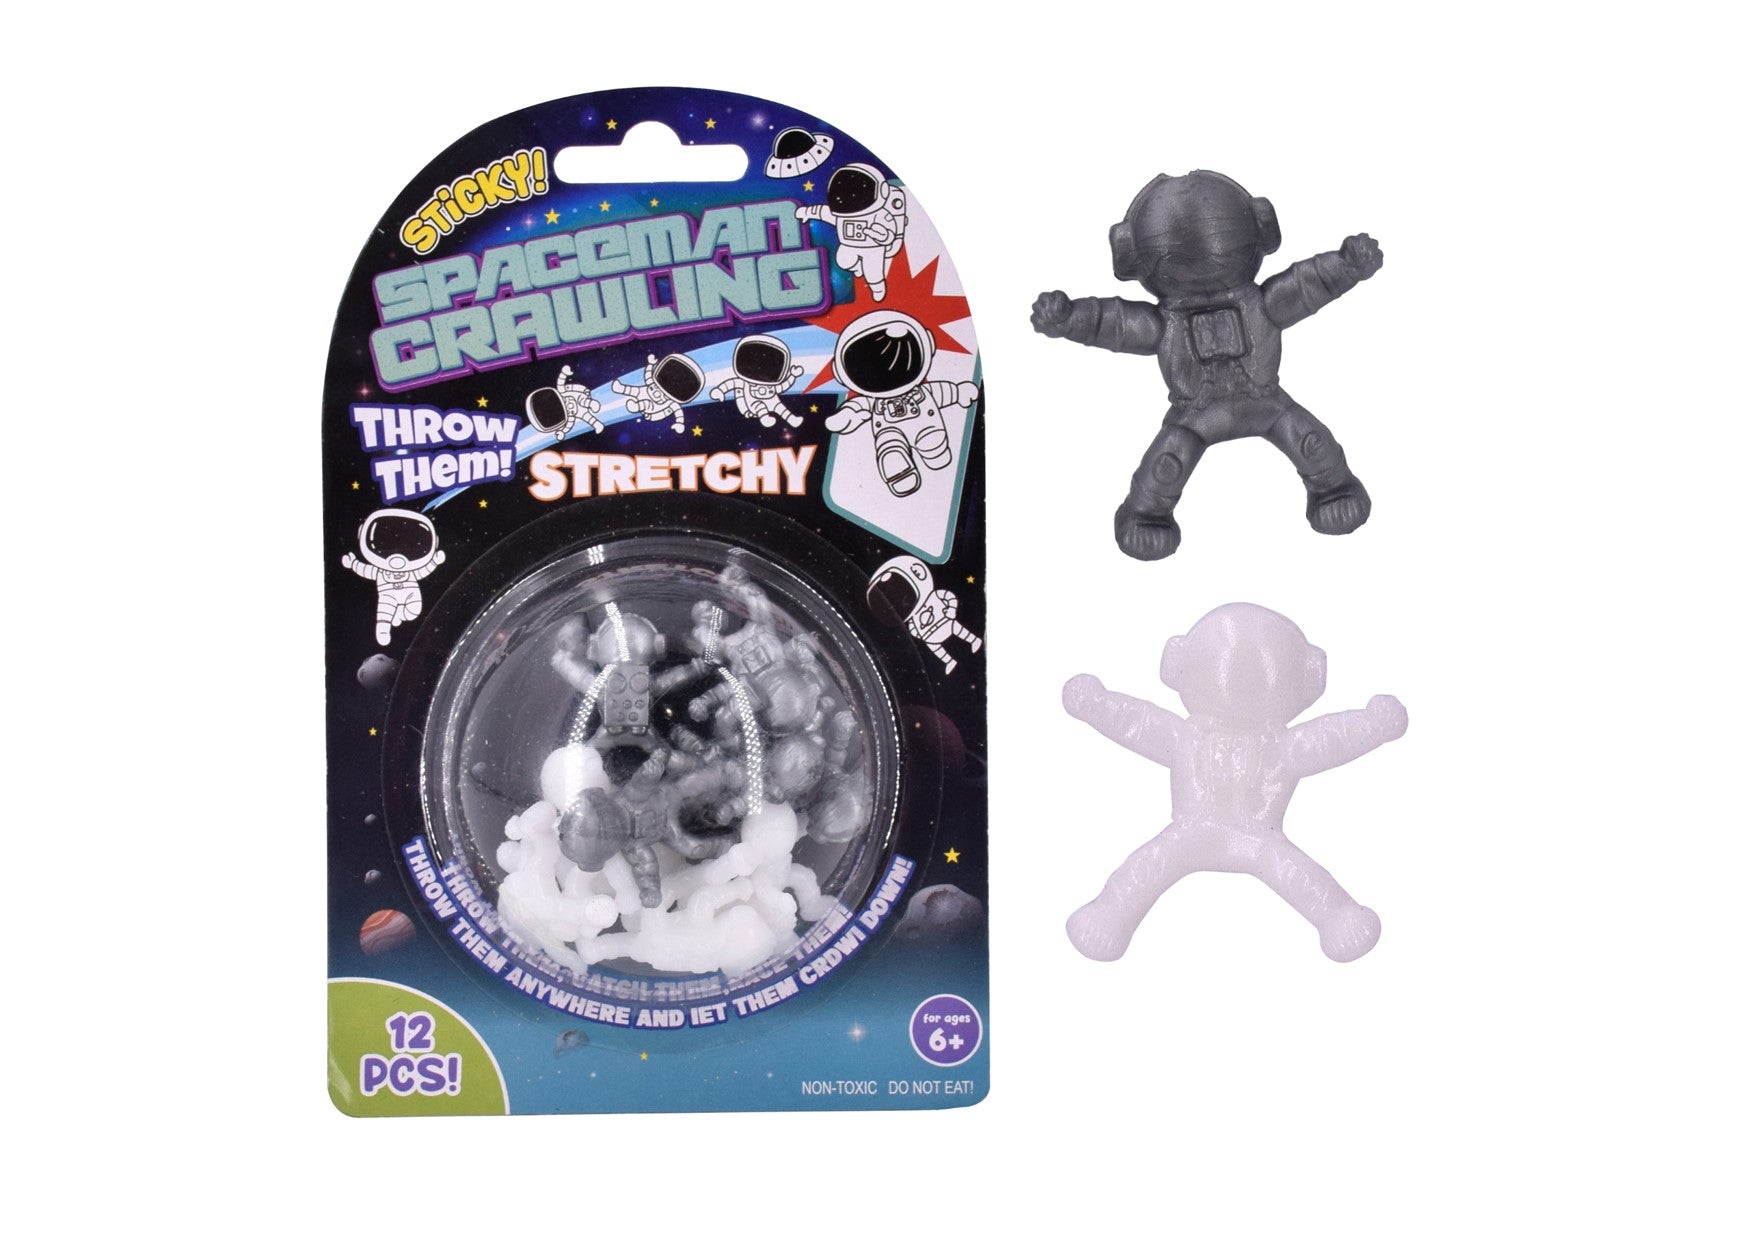 Stretchy Crawling Spaceman (7832298324167)